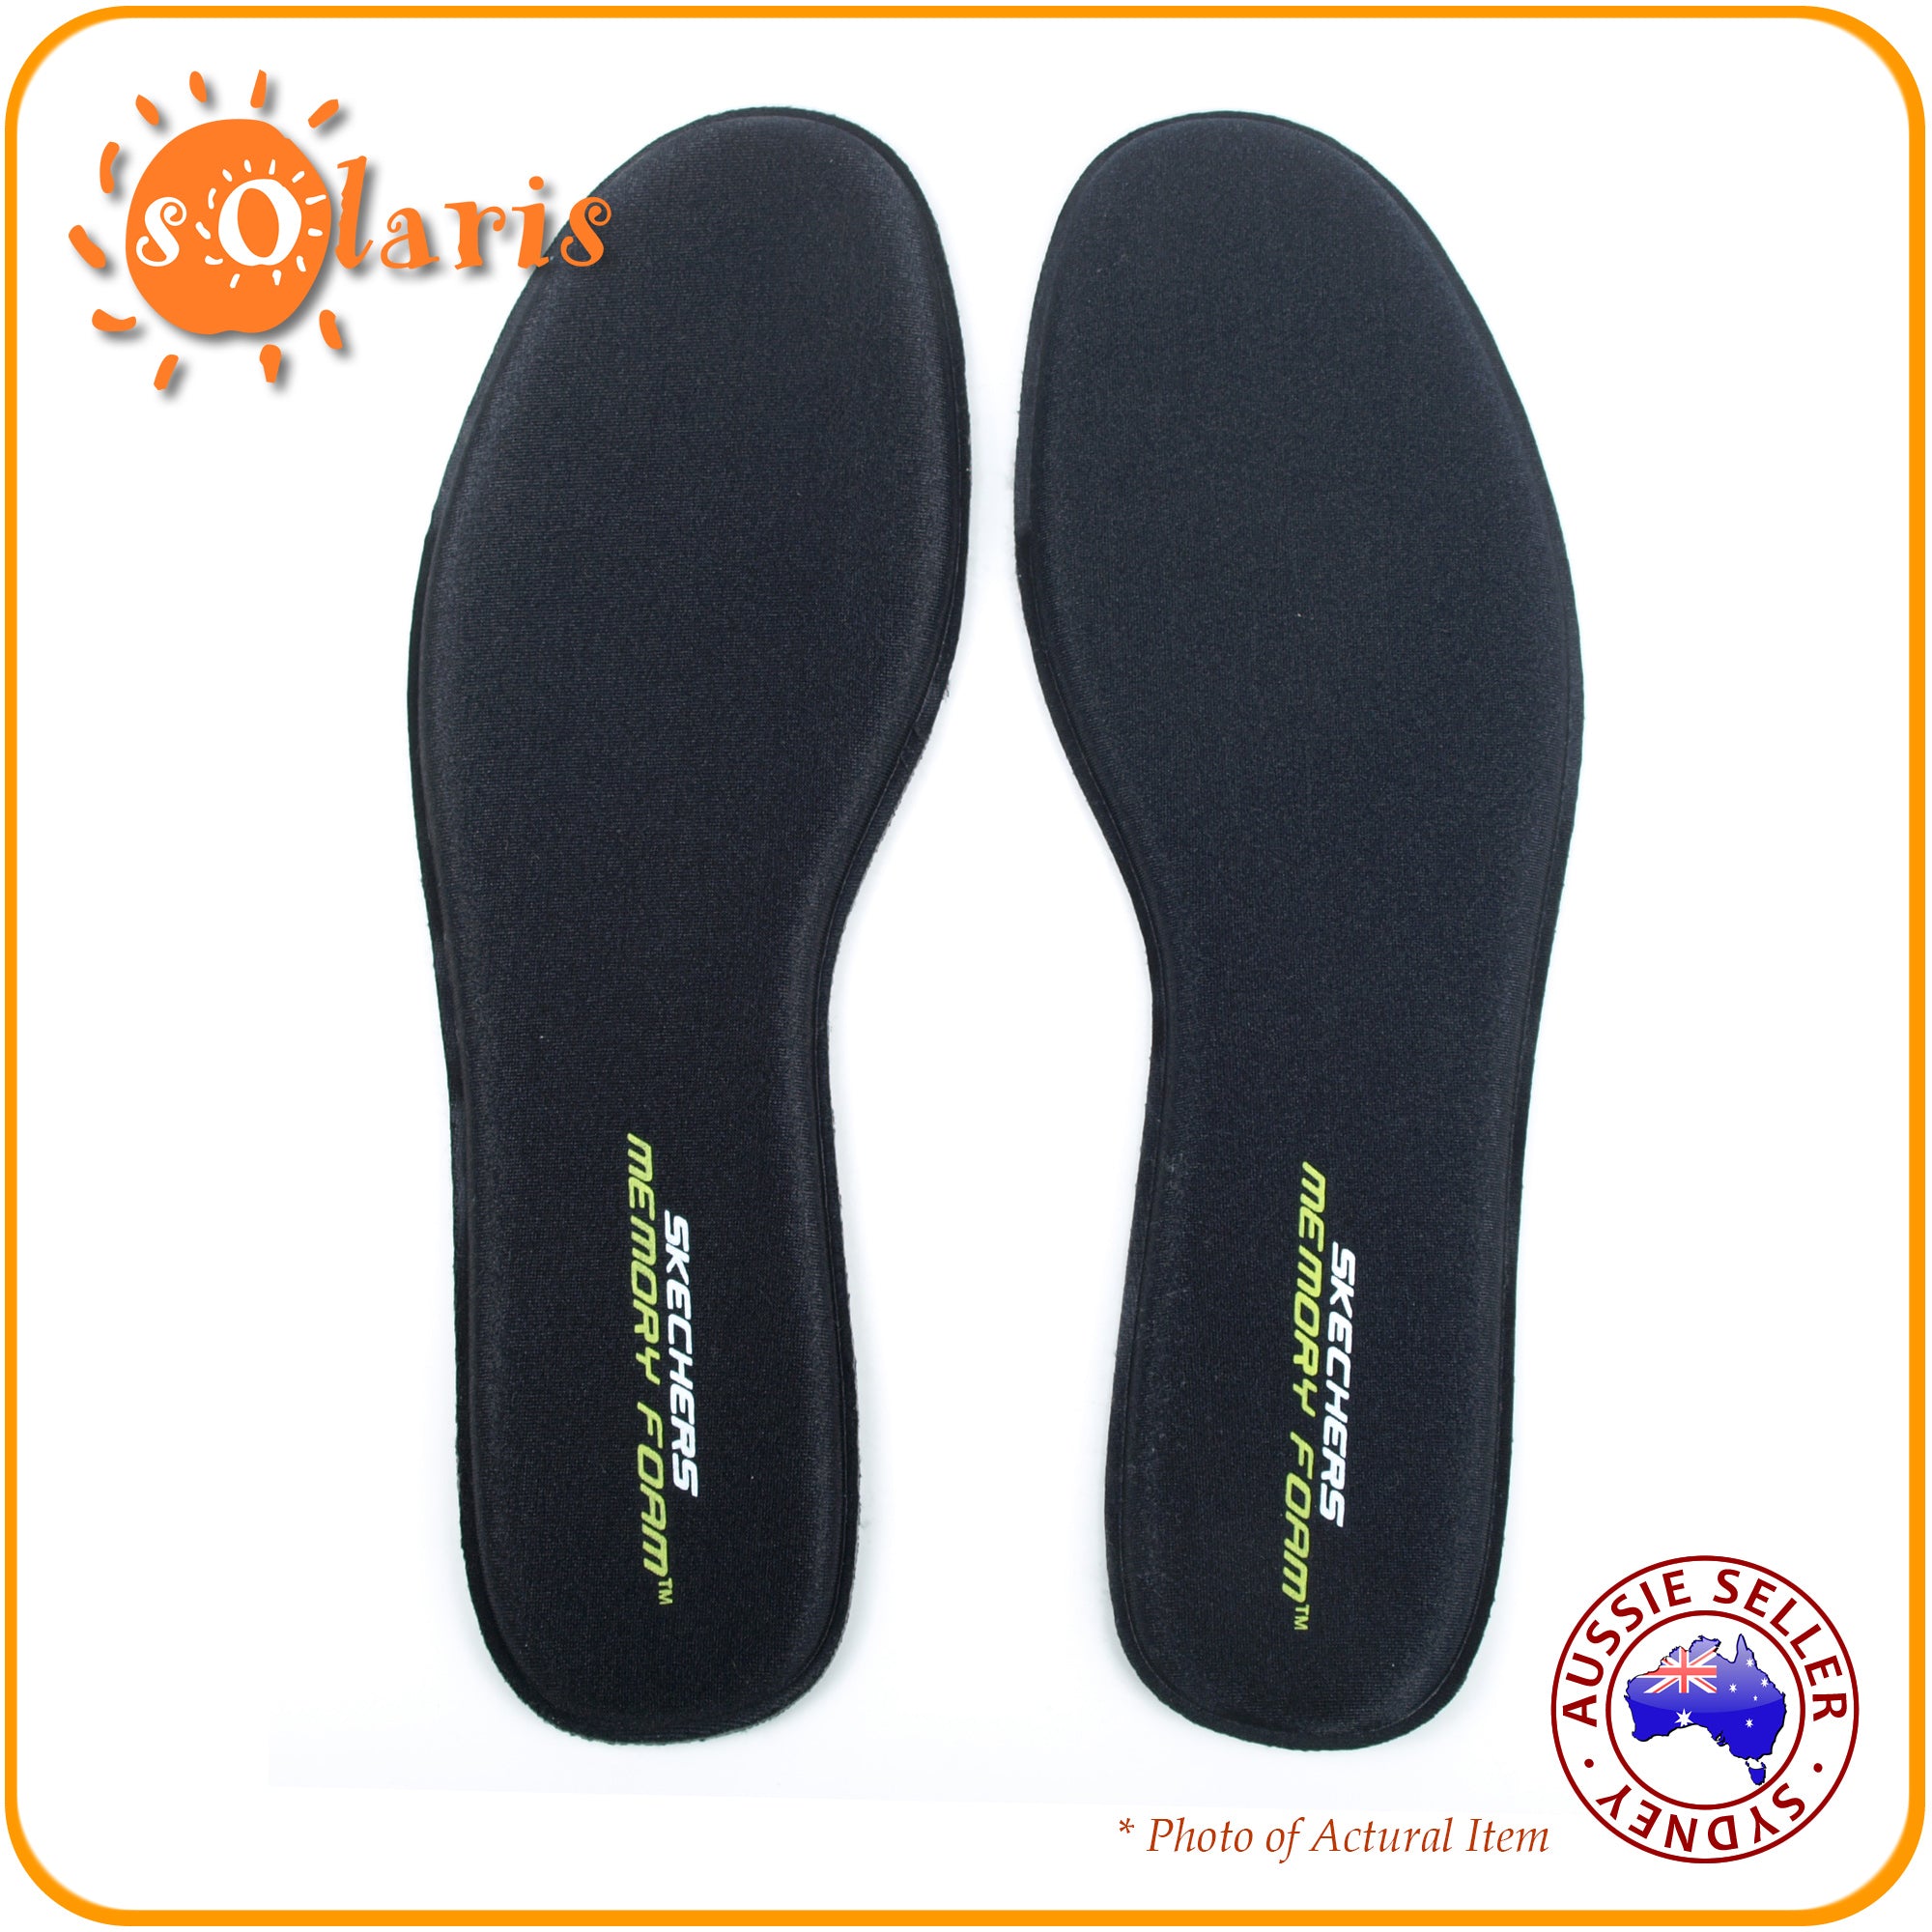 1x Pair SKECHERS Memory Foam Flat Insoles Super Comfy Replacement Inso – Solaris Sports &